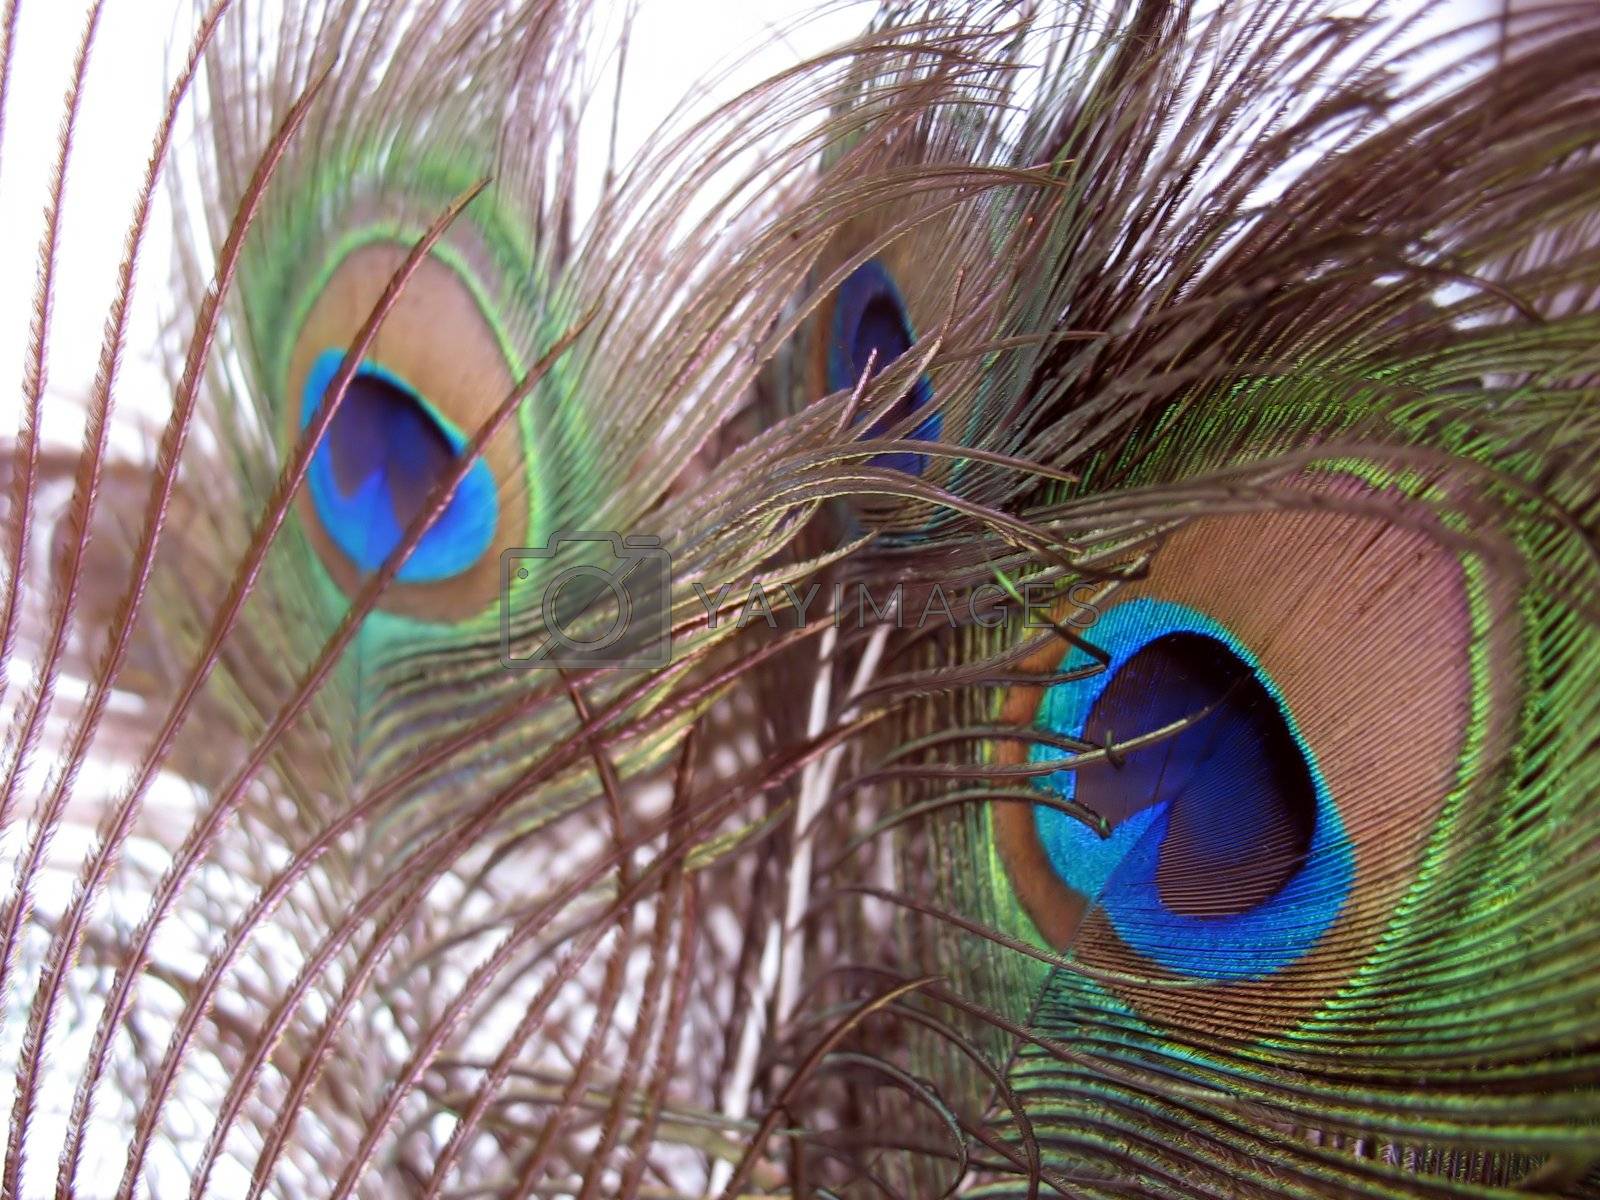 Royalty free image of peacock feathers by graficallyminded